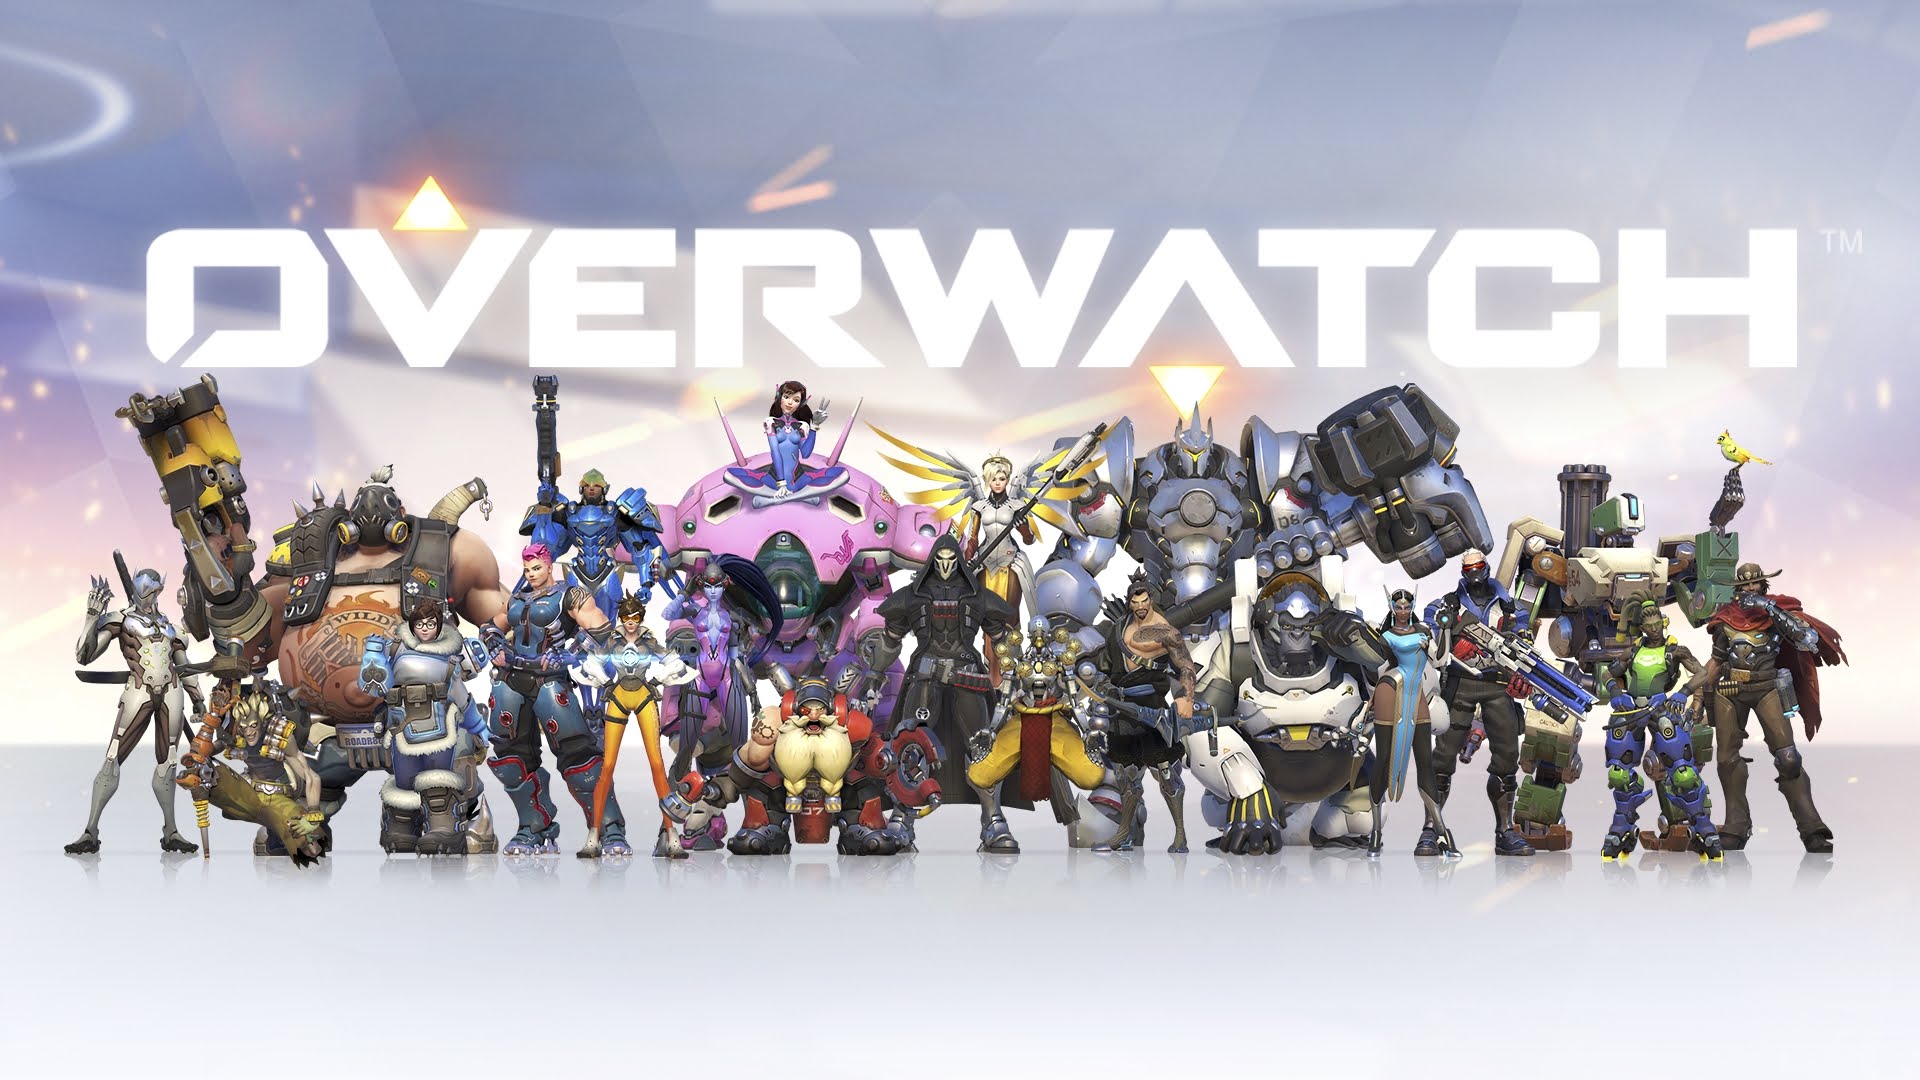 We are facing the last Overwatch competitive season – according to Blizzard